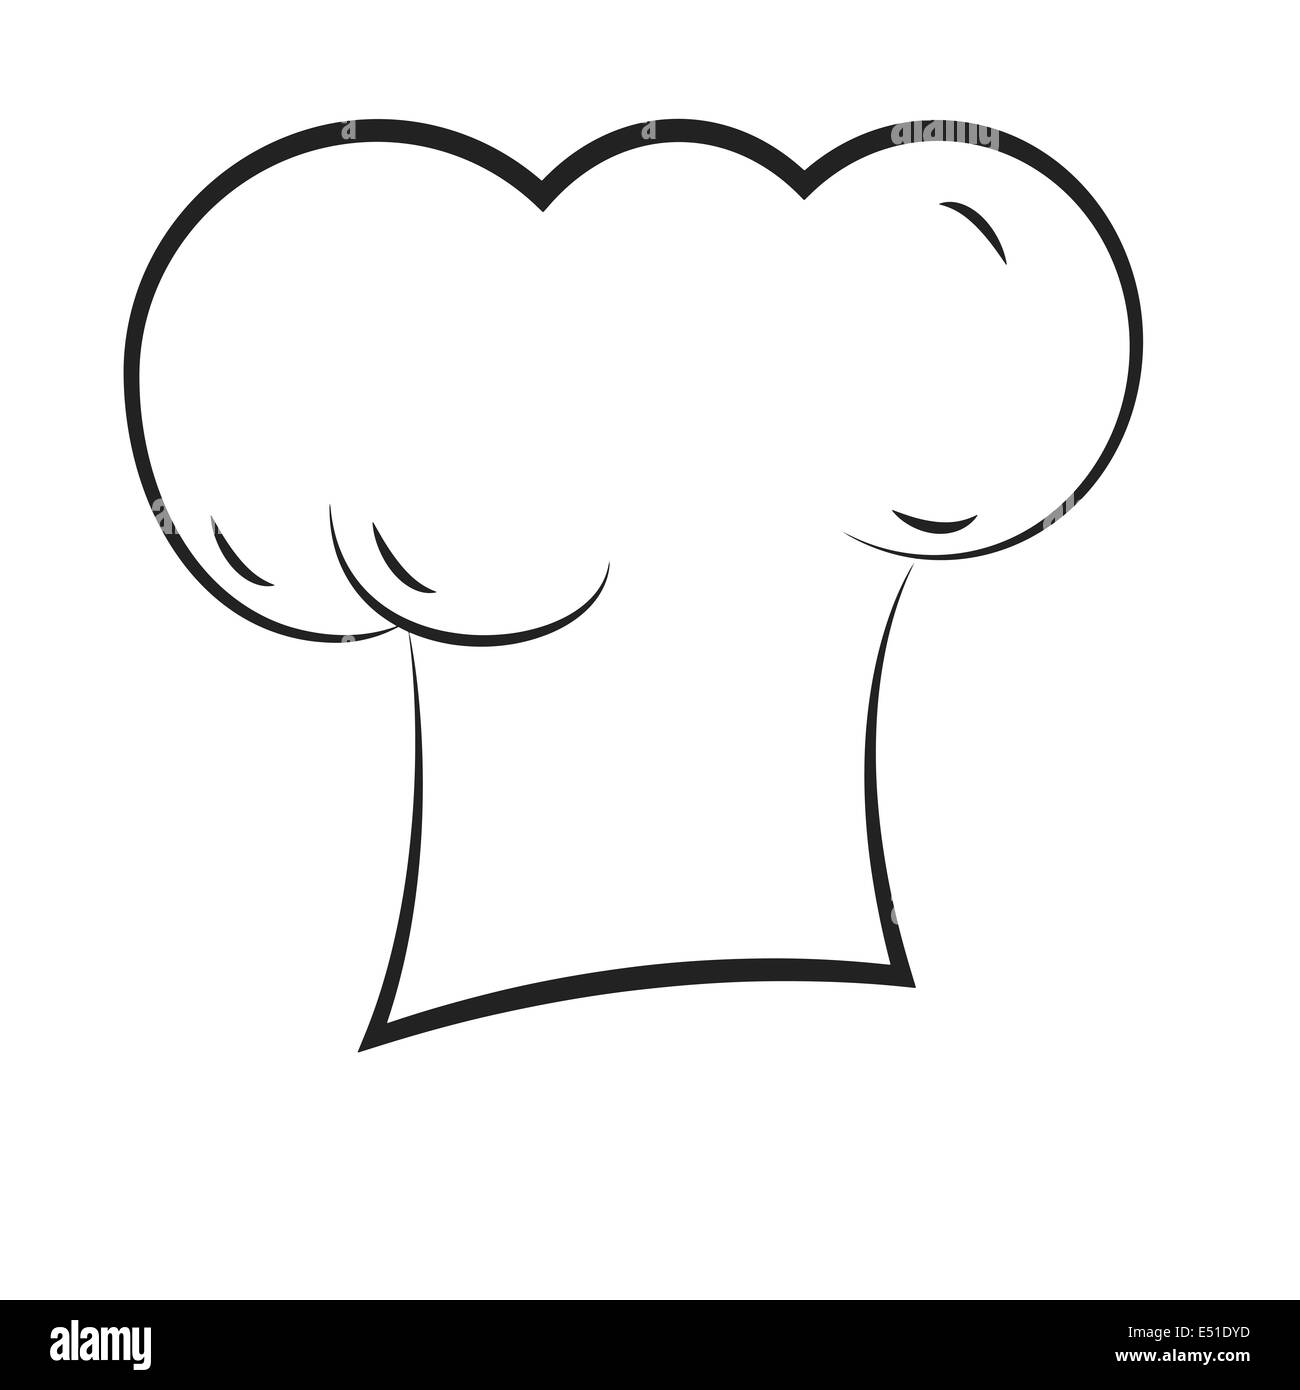 chef hat outline Stock Photo